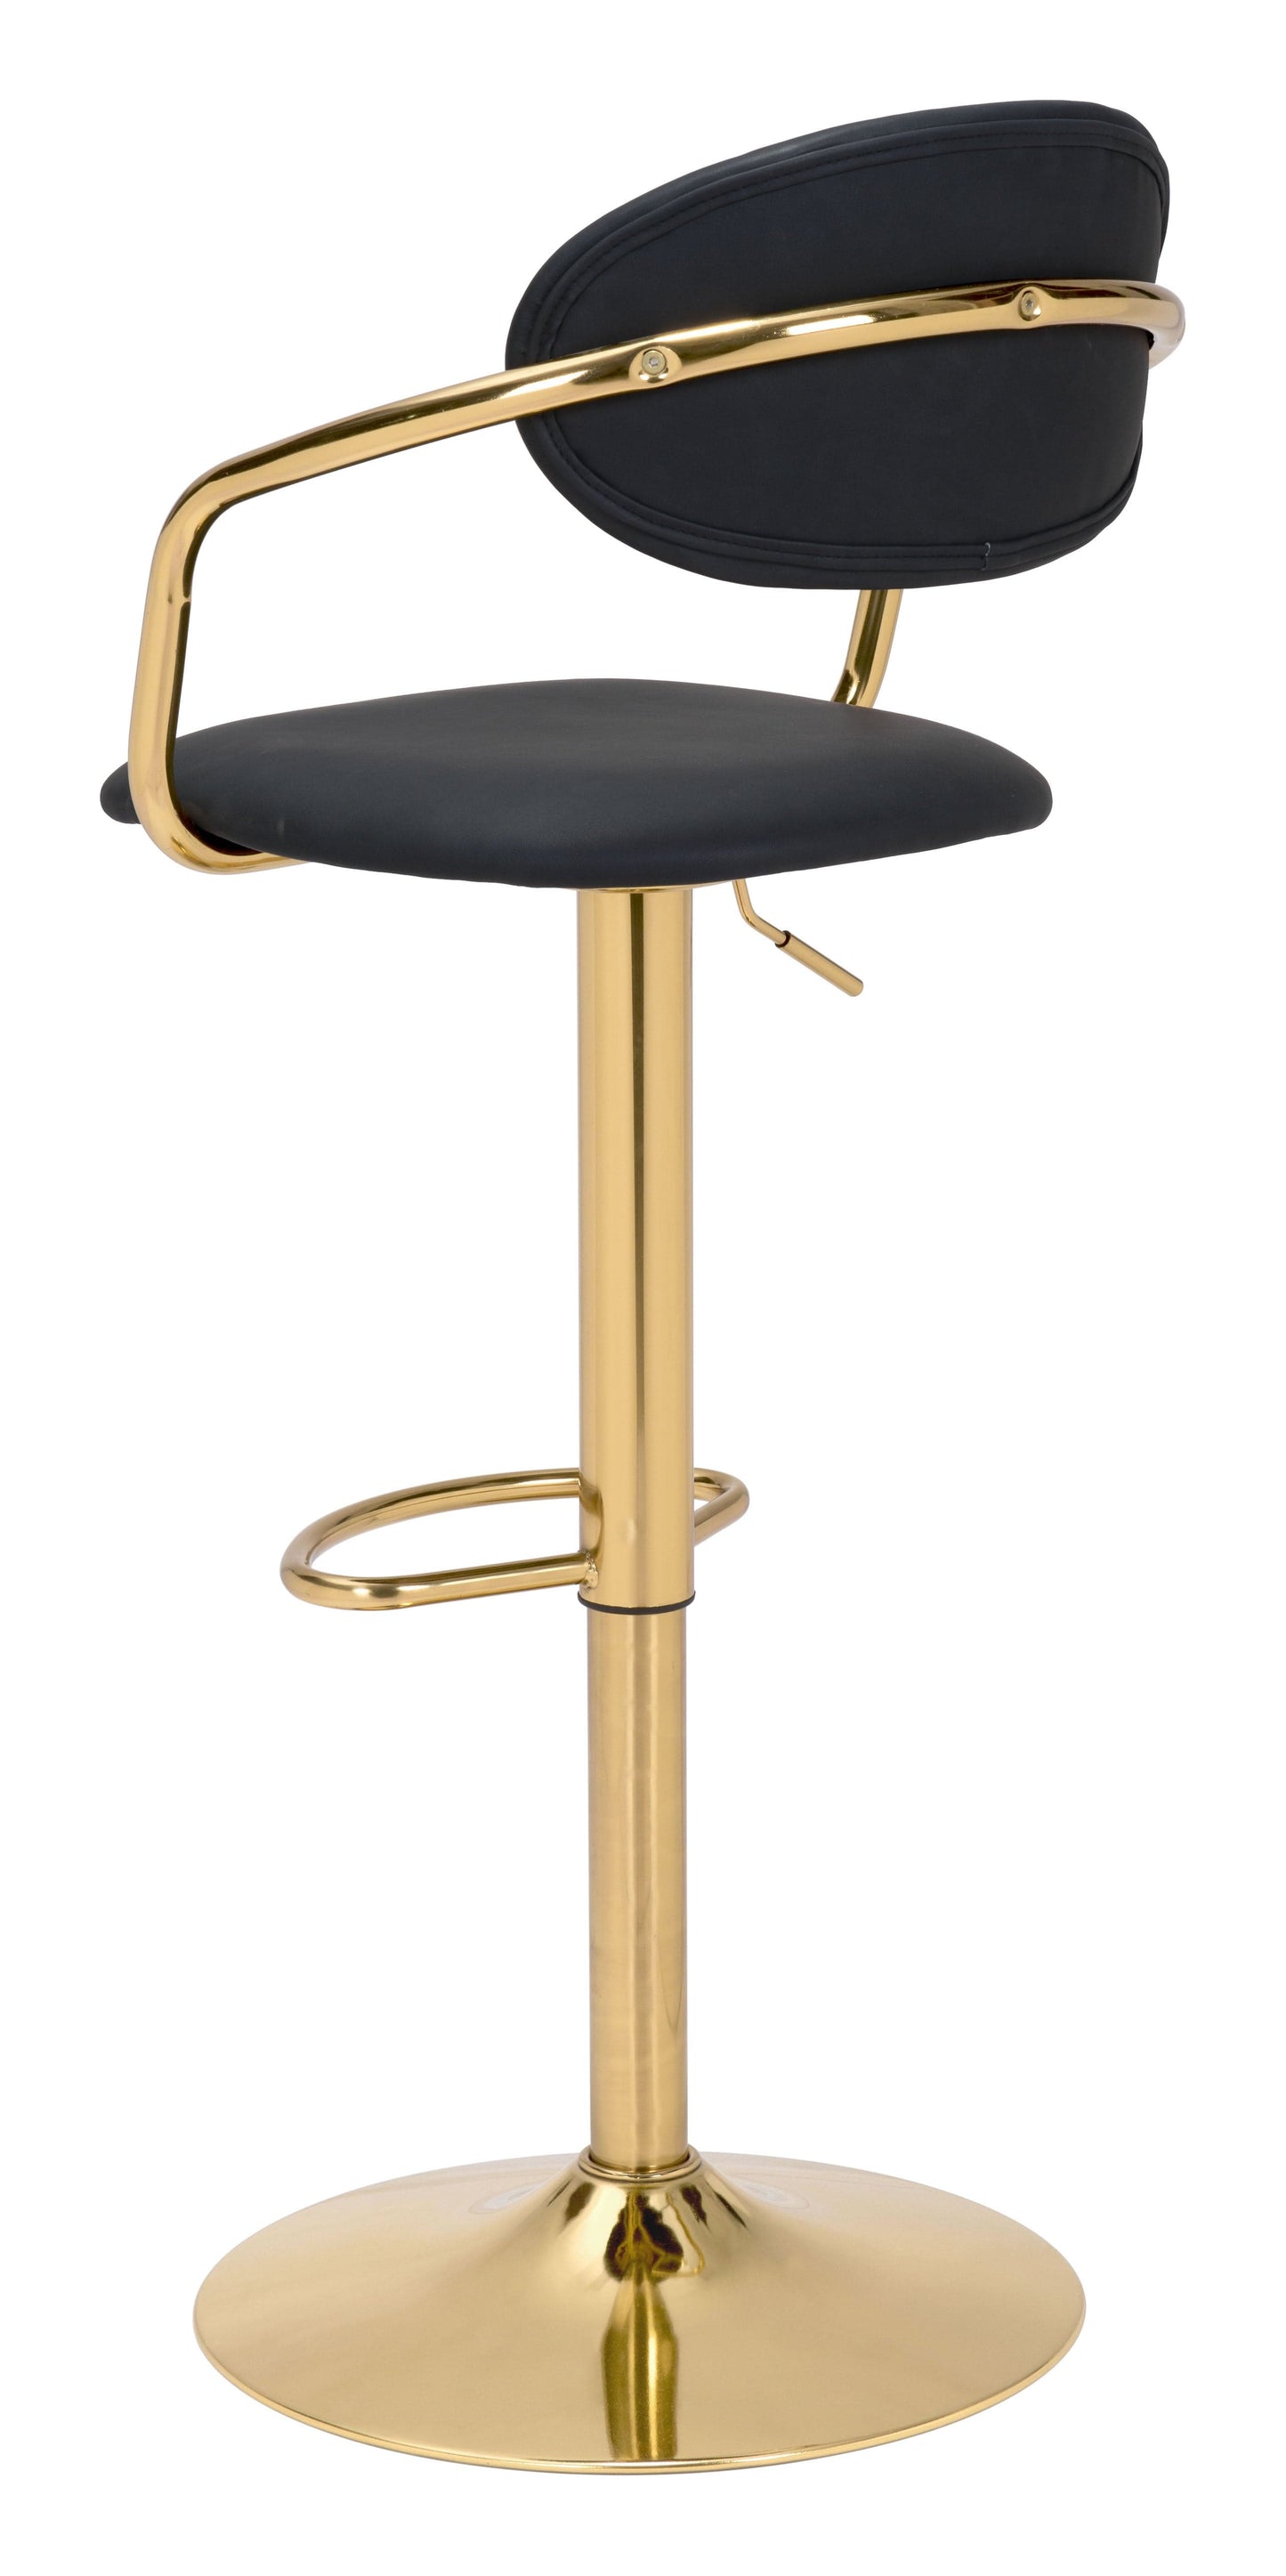 Angled Side View of Height Adjustable Chair